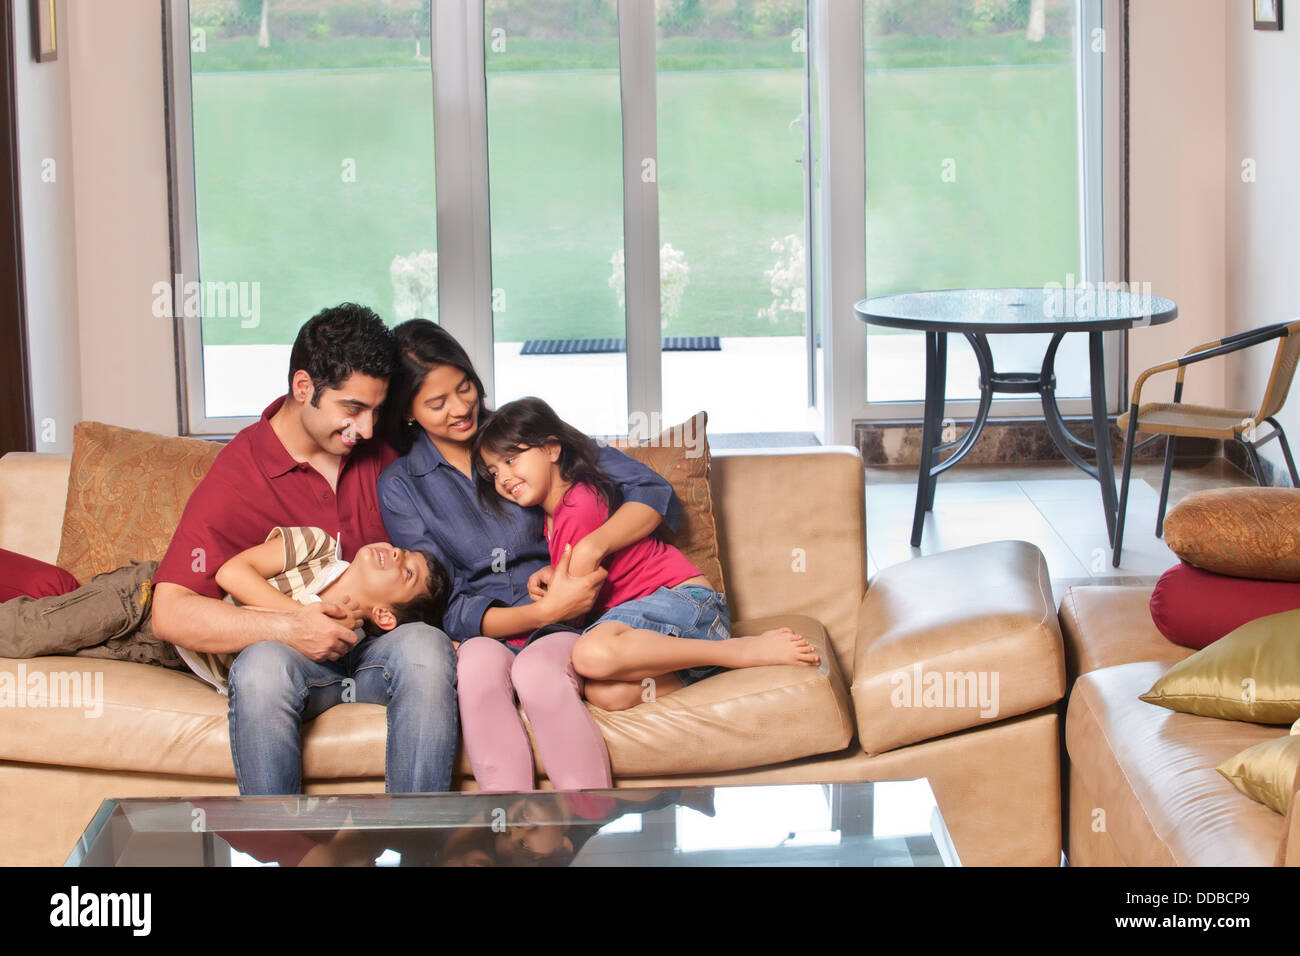 Parents sitting together with kids on sofa at home Stock Photo